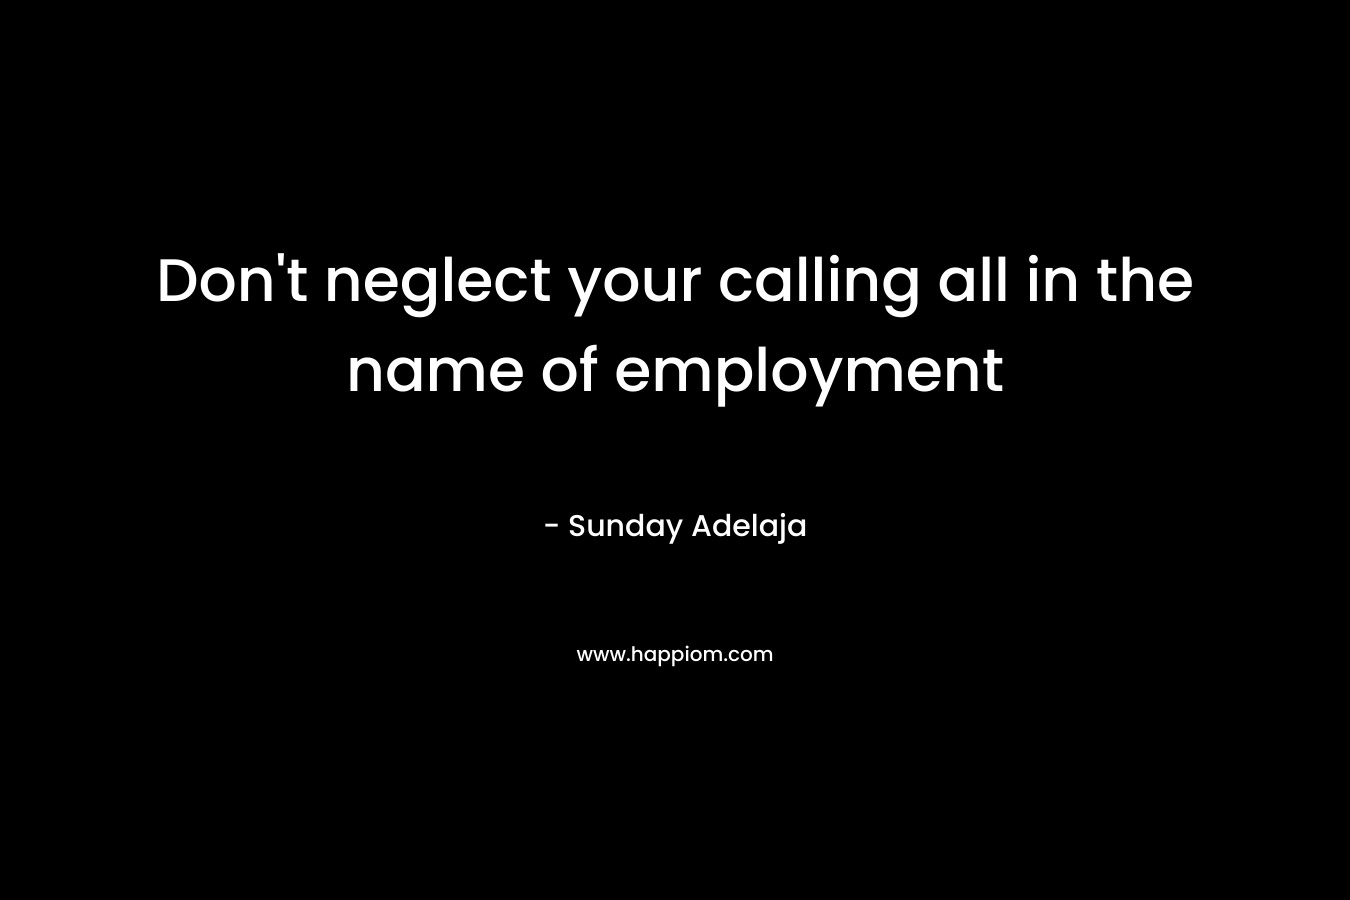 Don't neglect your calling all in the name of employment